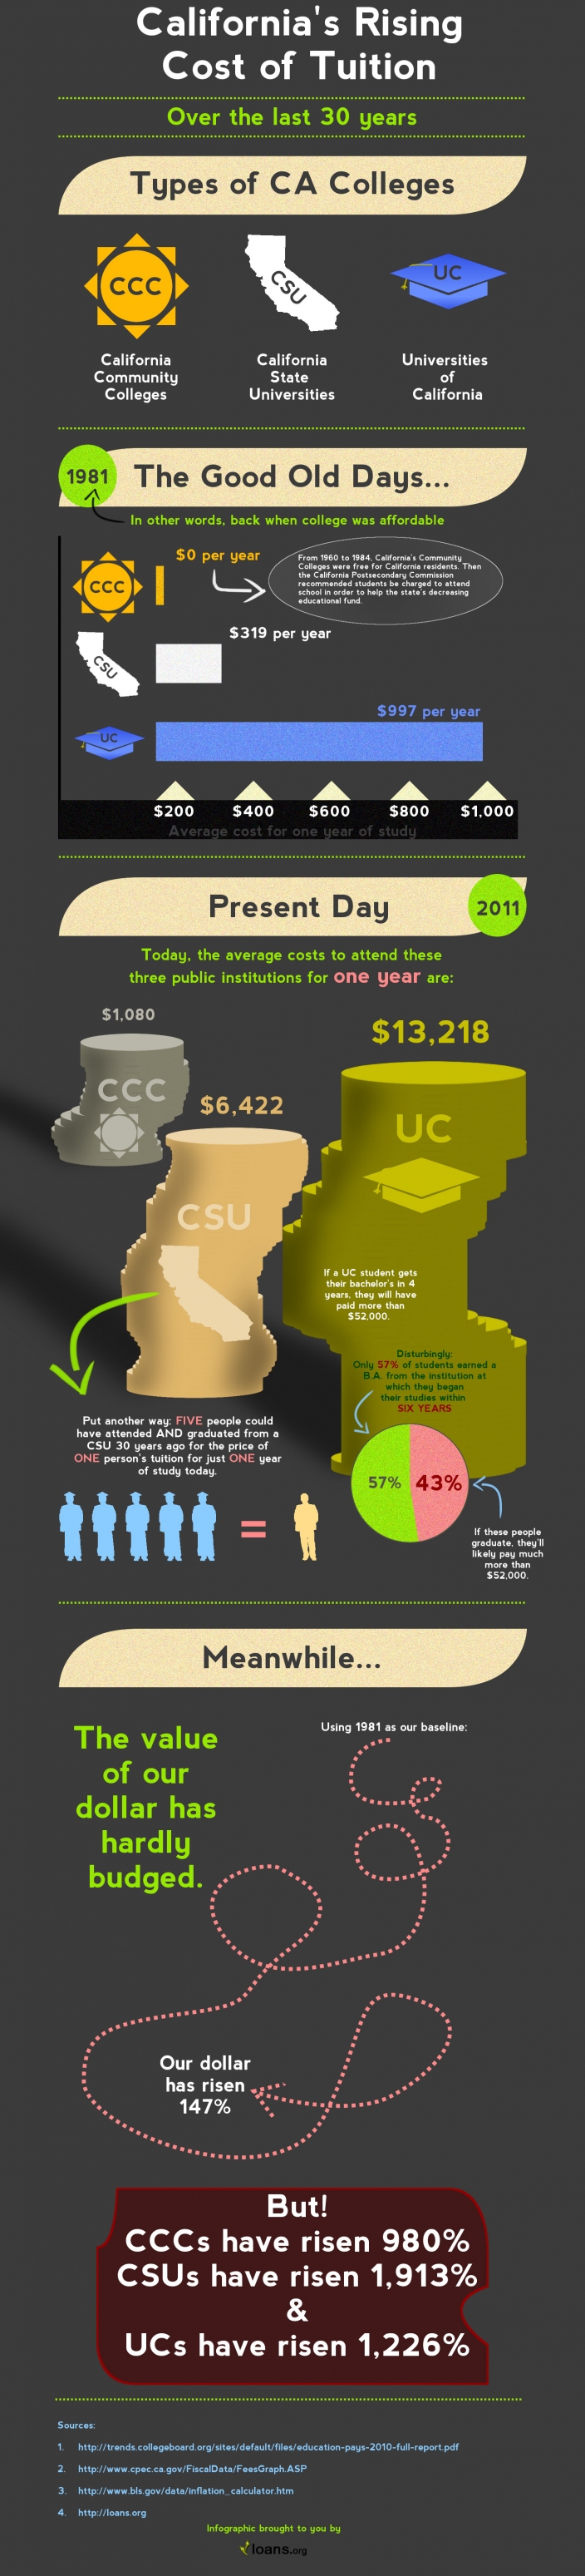 California’s Rising Cost of Tuition